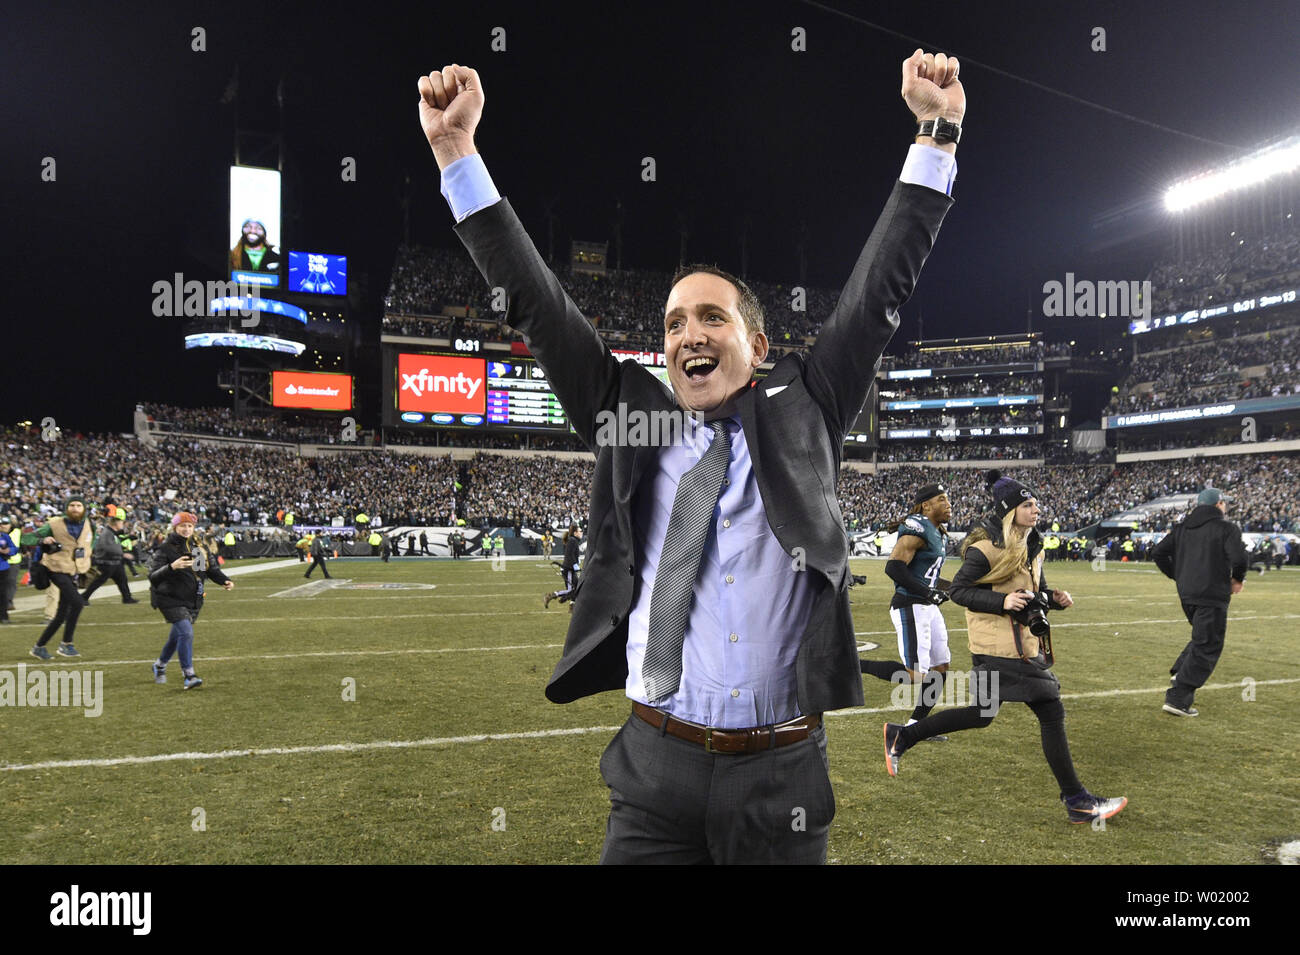 Philadelphia Eagles executive vice president of football operations Howie  Roseman celebrates after winning the NFC Championship at Lincoln Financial  Field in Philadelphia on January 21, 2018. The Eagles defeated the  Minnesota Vikings